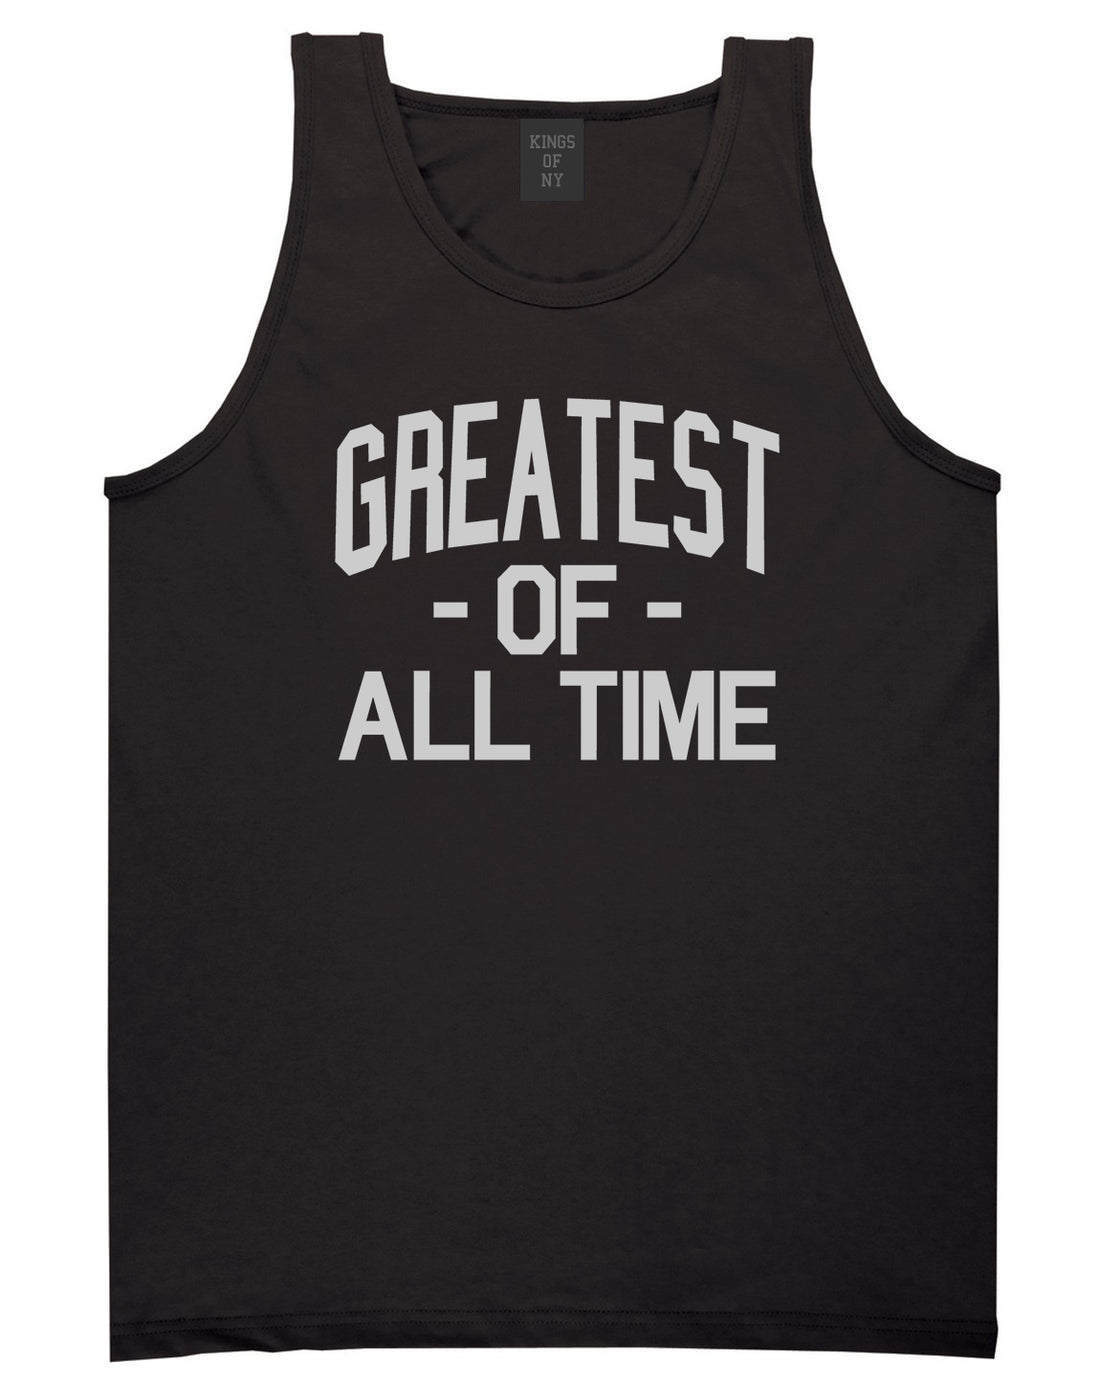 Greatest Of All Time GOAT Mens Tank Top Shirt Black by Kings Of NY